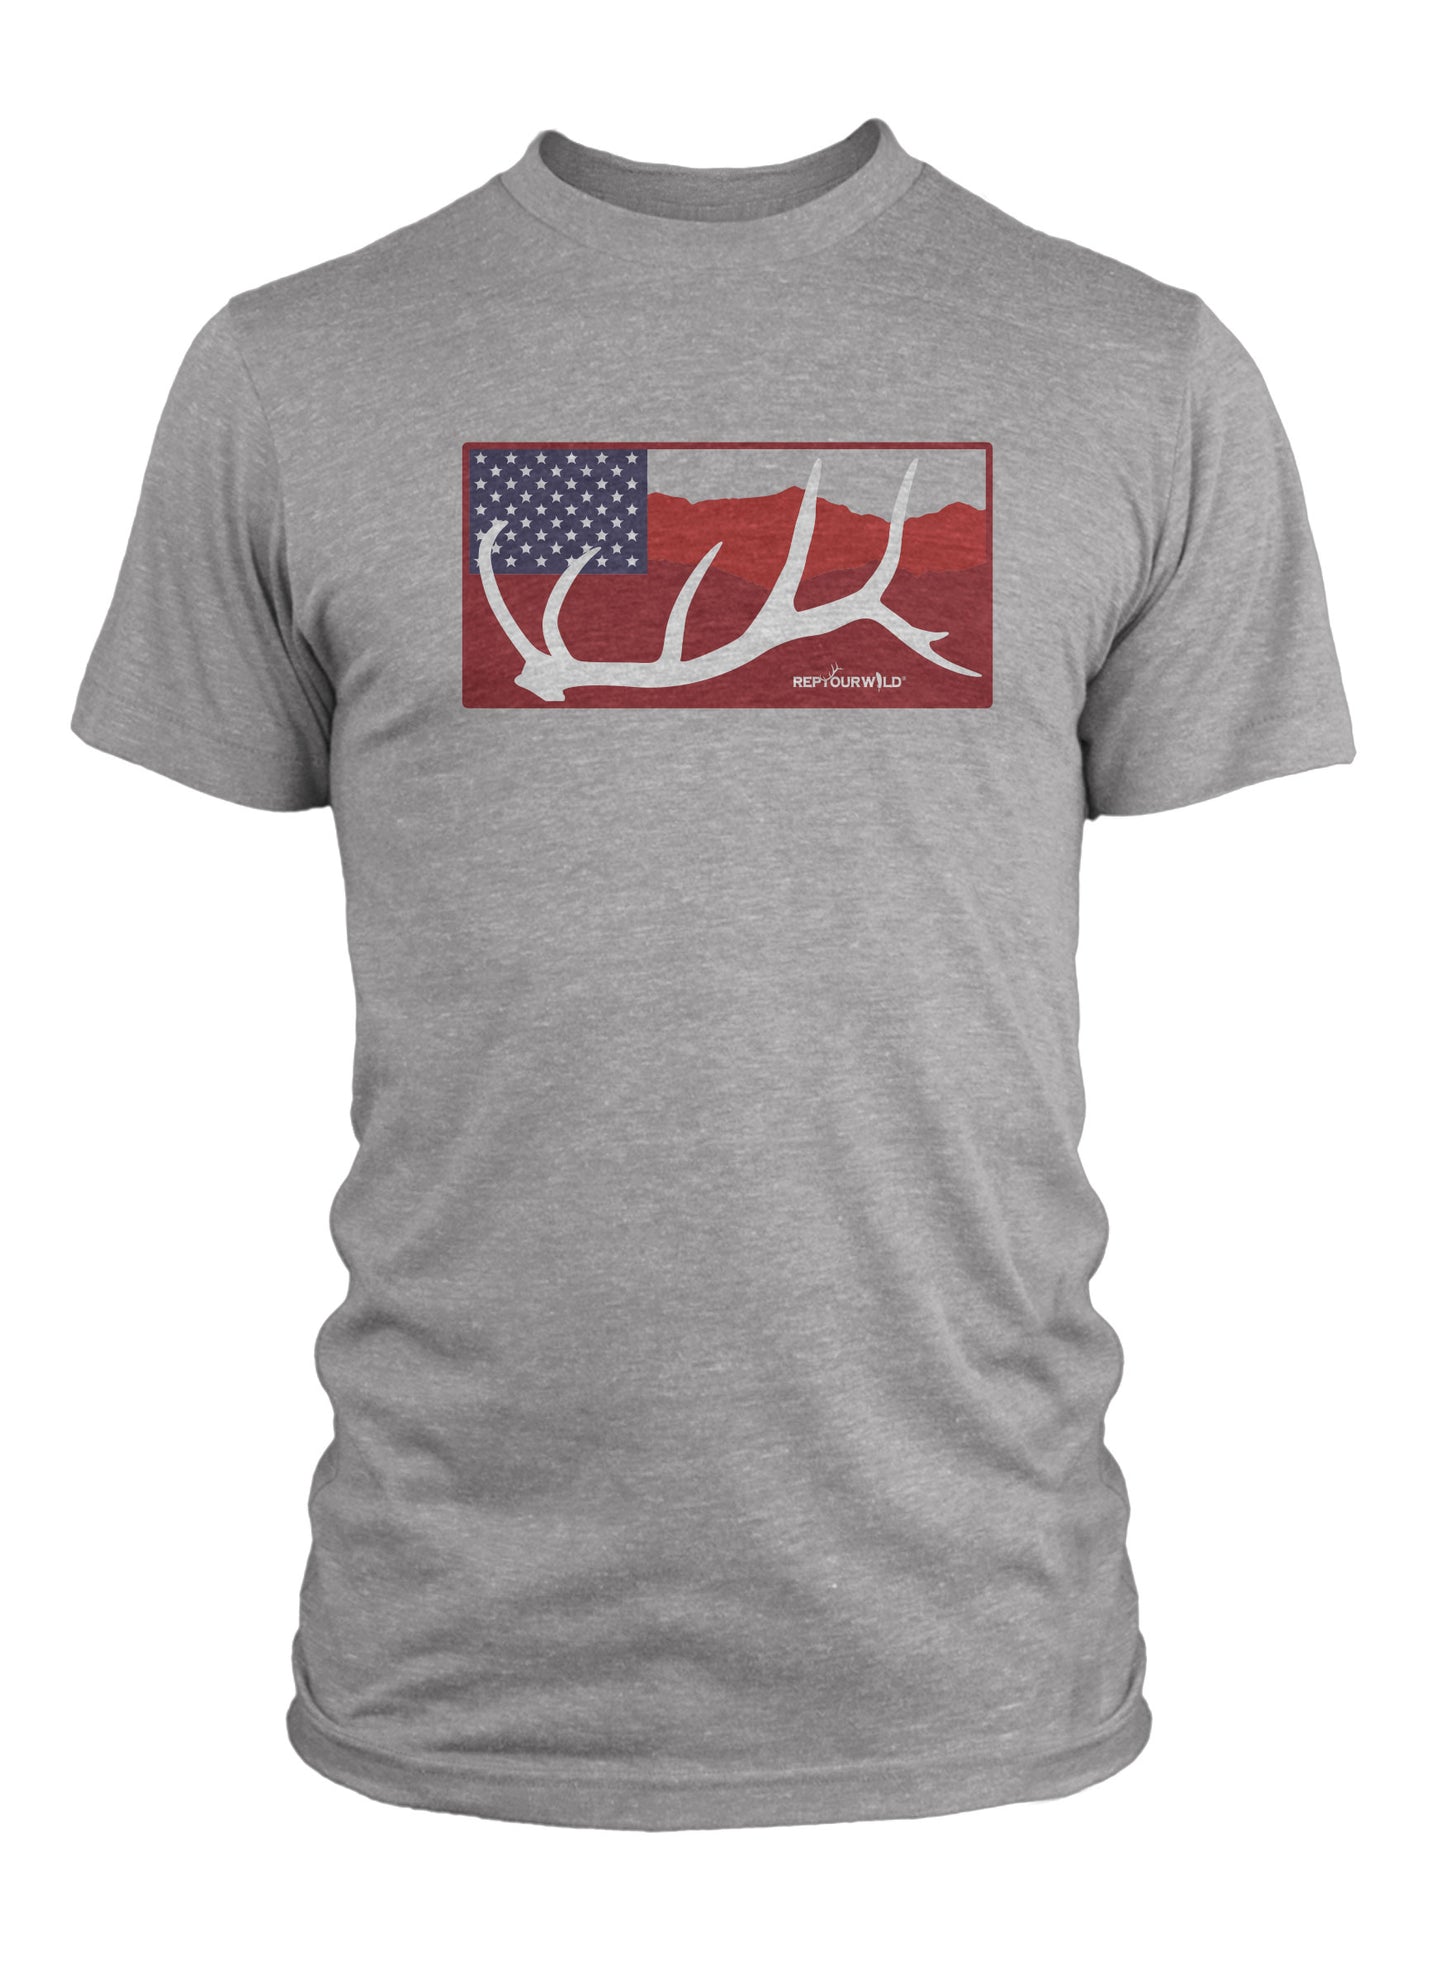 A short sleeved gray tee shirt has a print on the chest with an elk antler in front of mountains and 50 stars in a blue rectangle and says repyourwild underneath